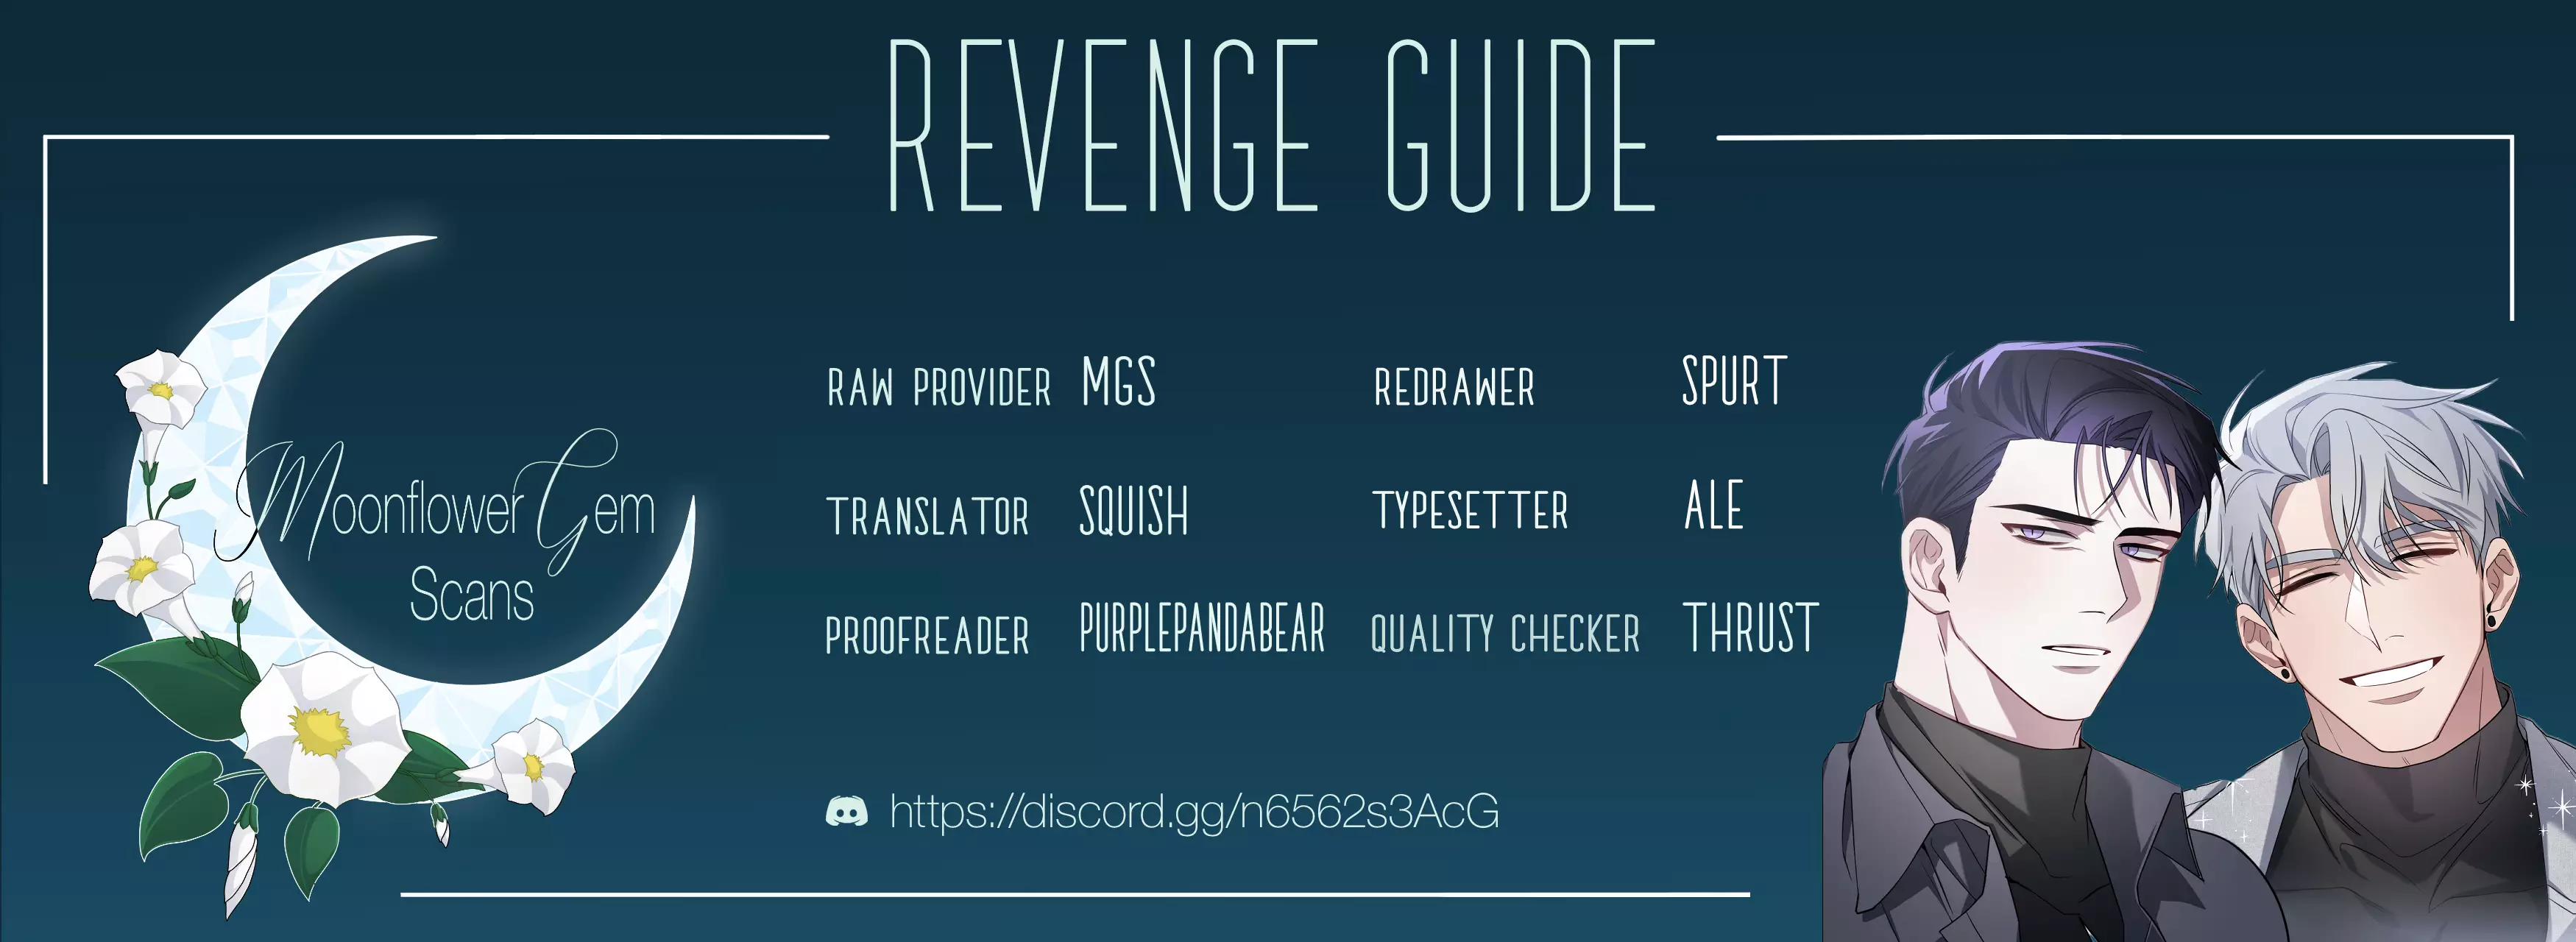 Revenge Guide - 9 page 1-512d7bef